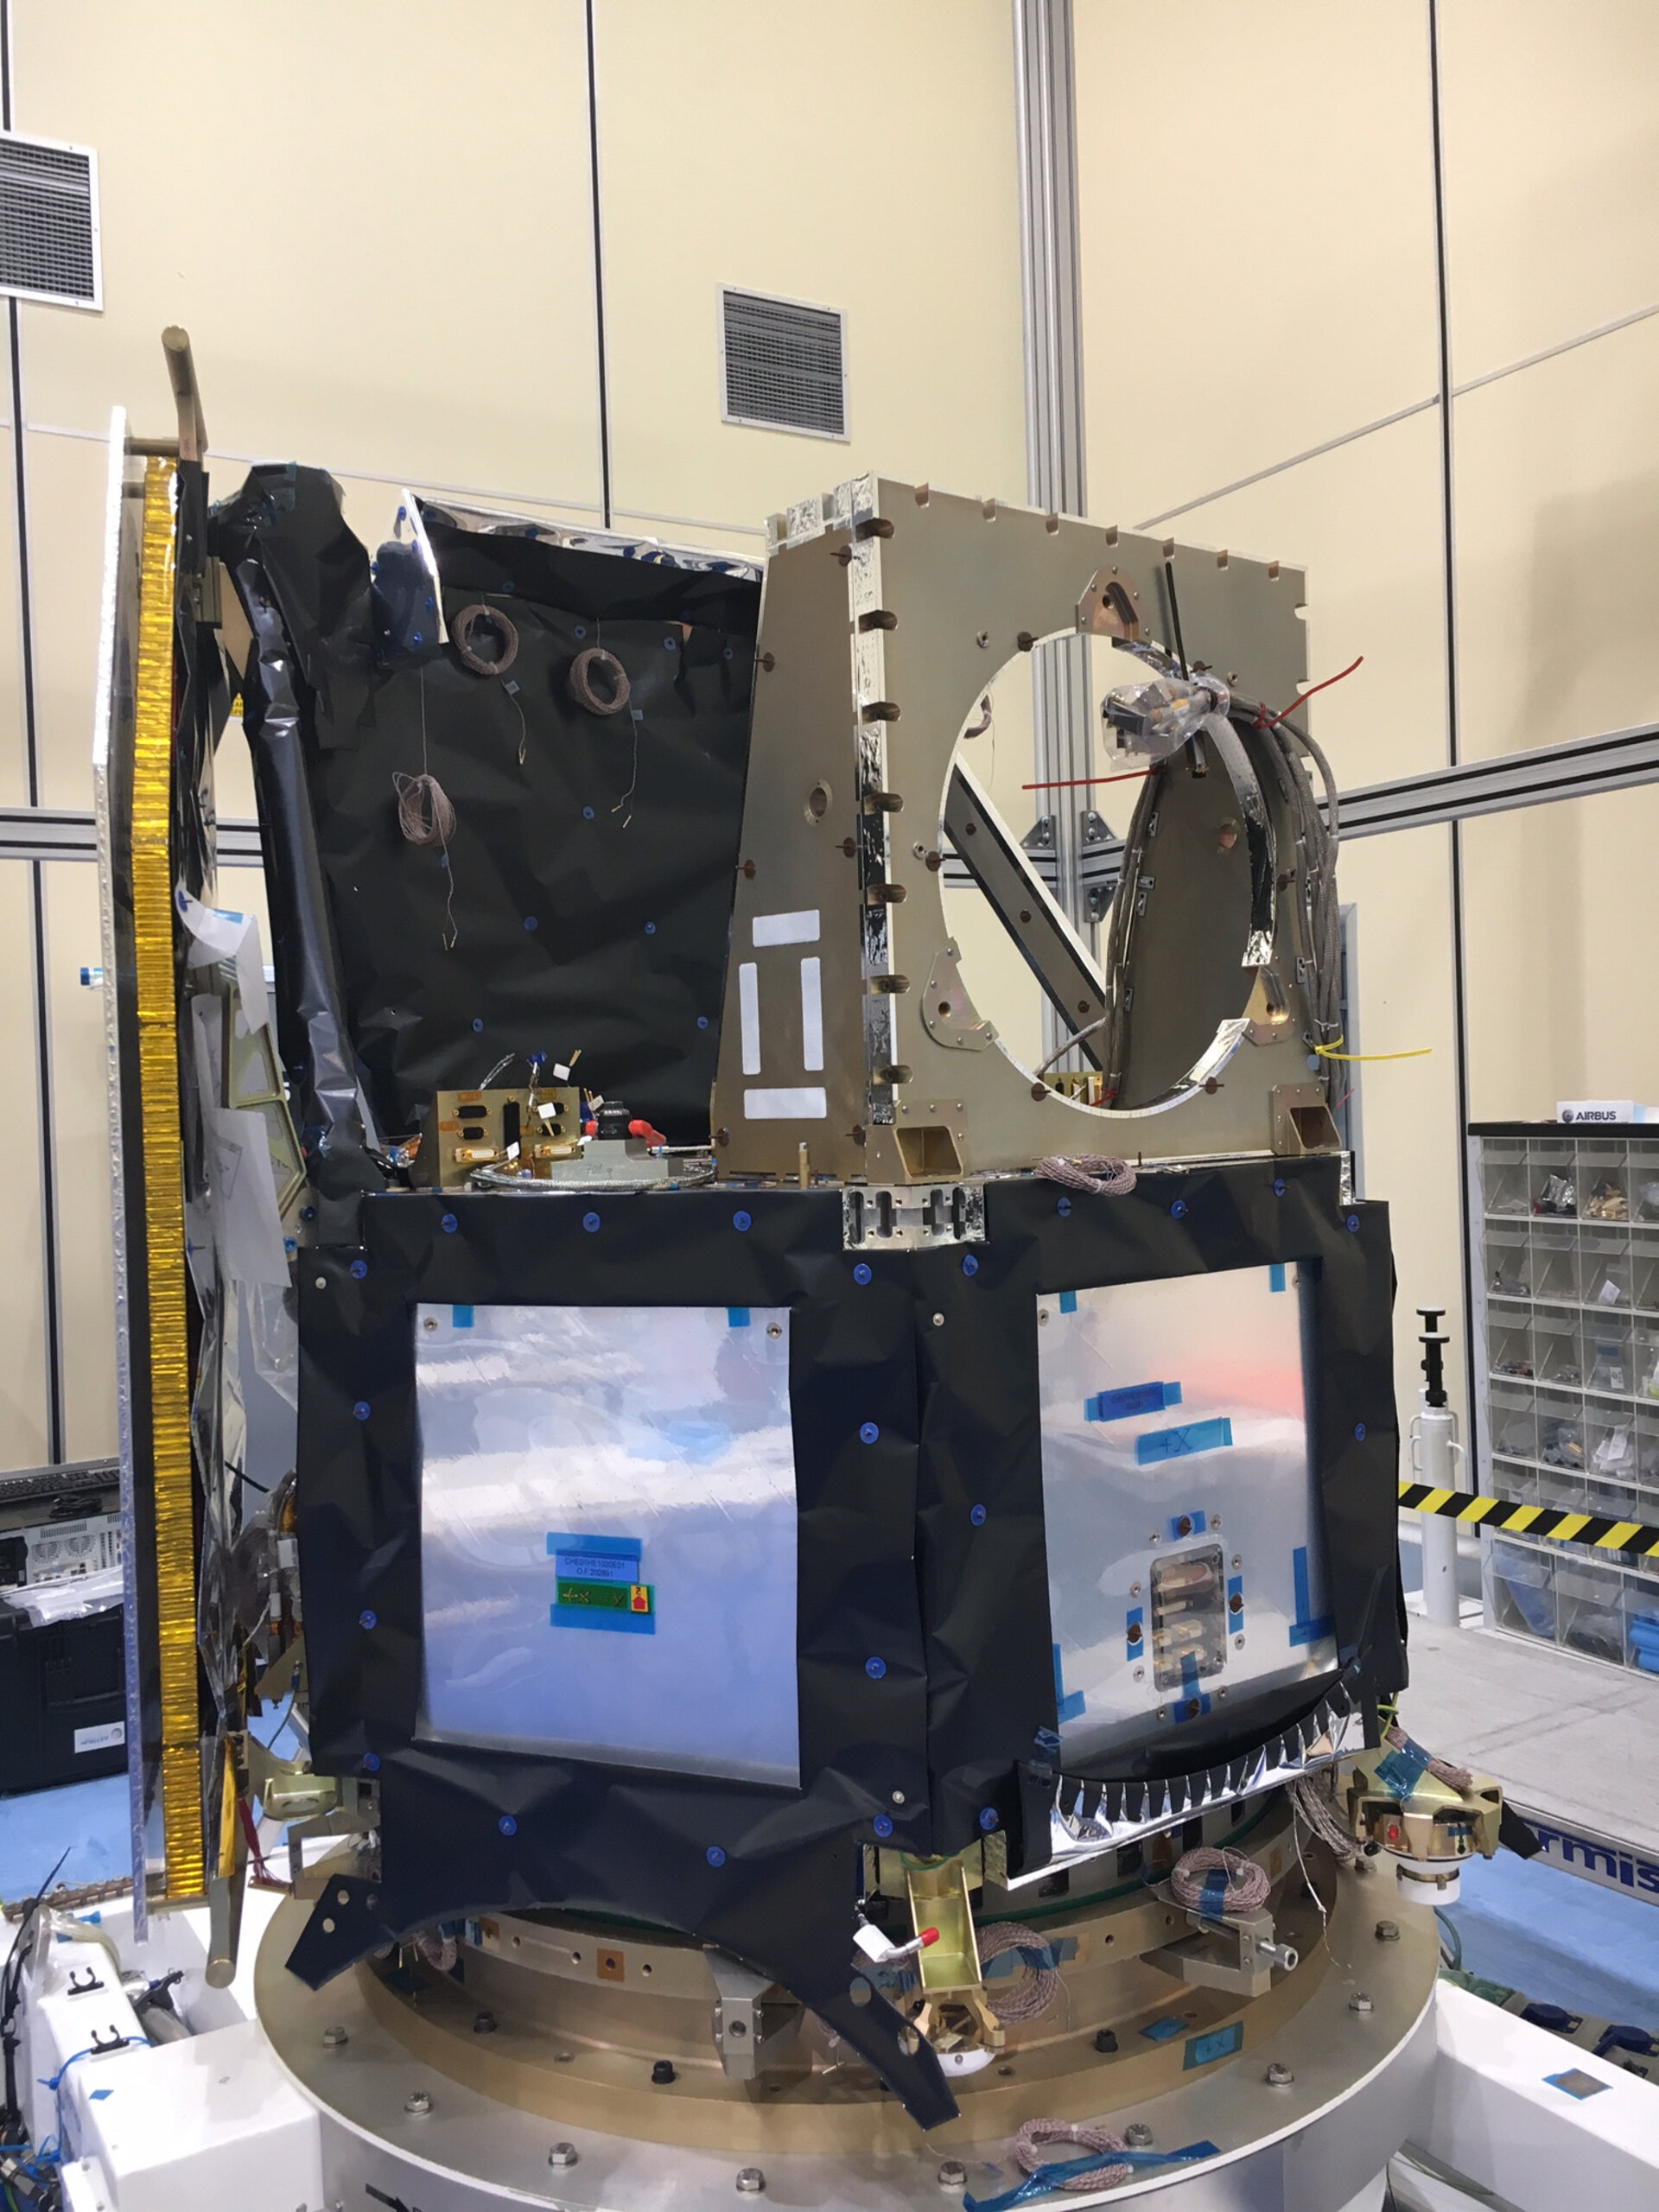 Side view of the CHEOPS spacecraft platform